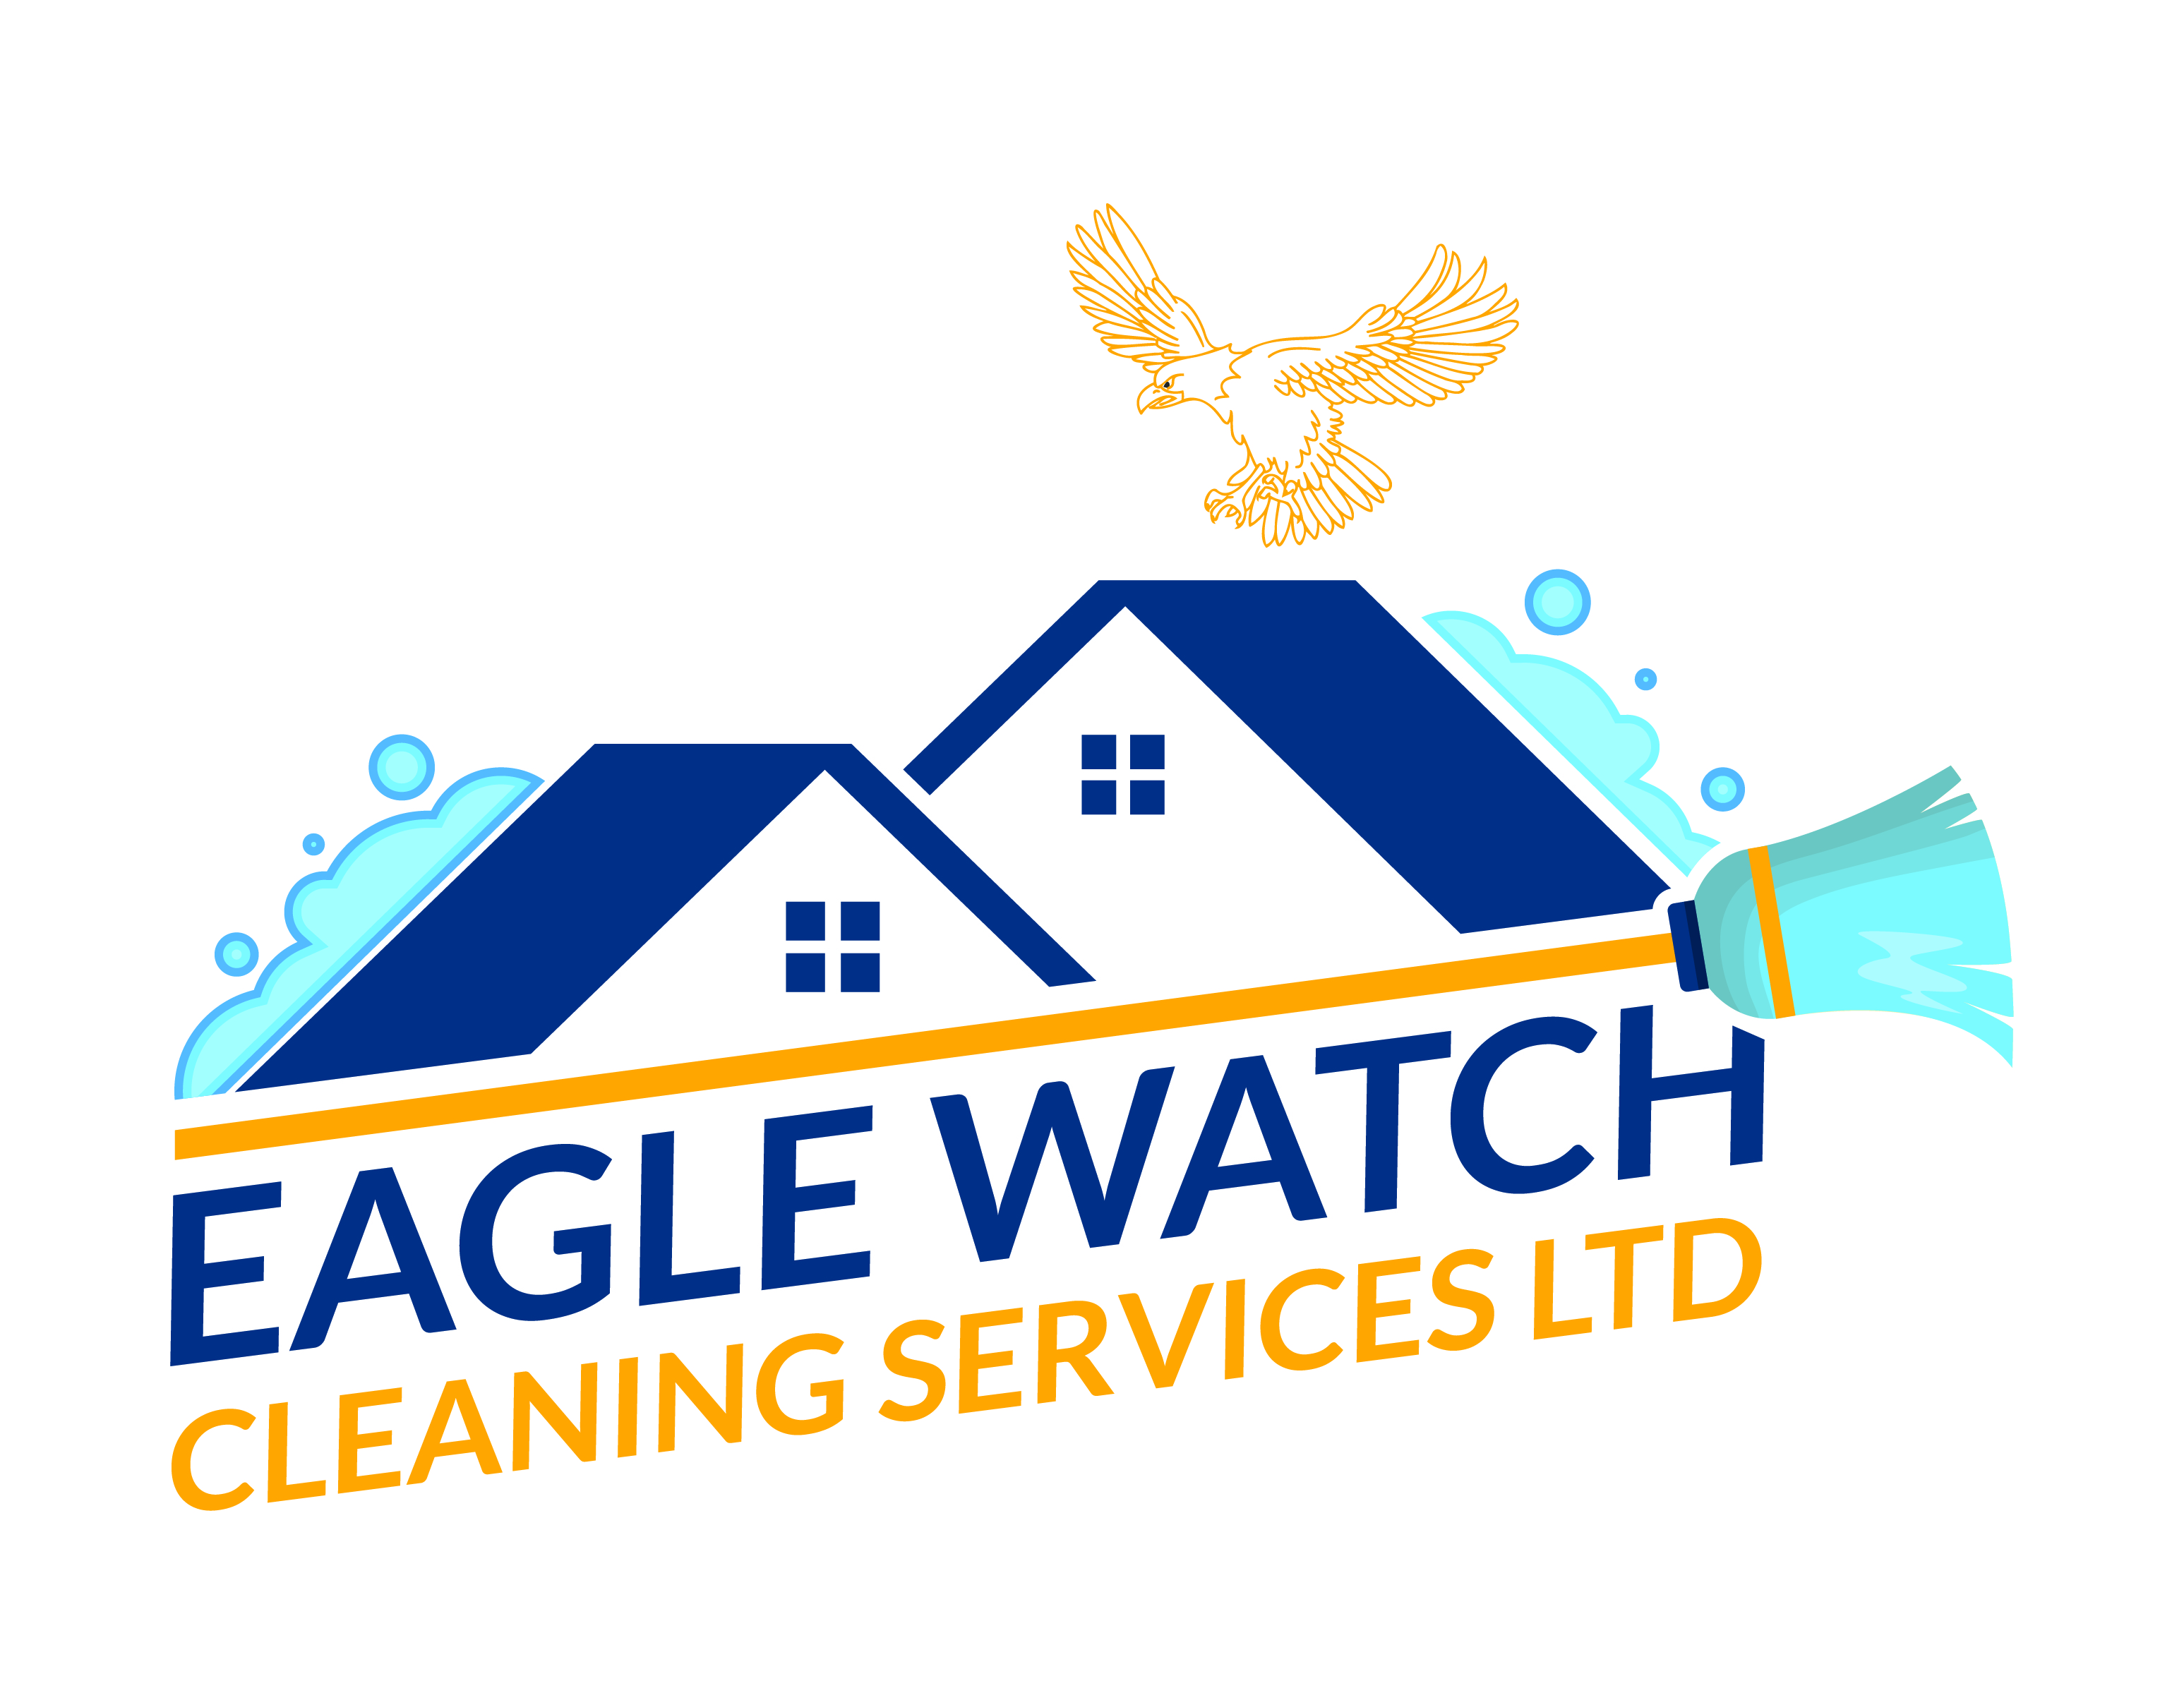 EAGLE WATCH CLEANING SERVICES LTD